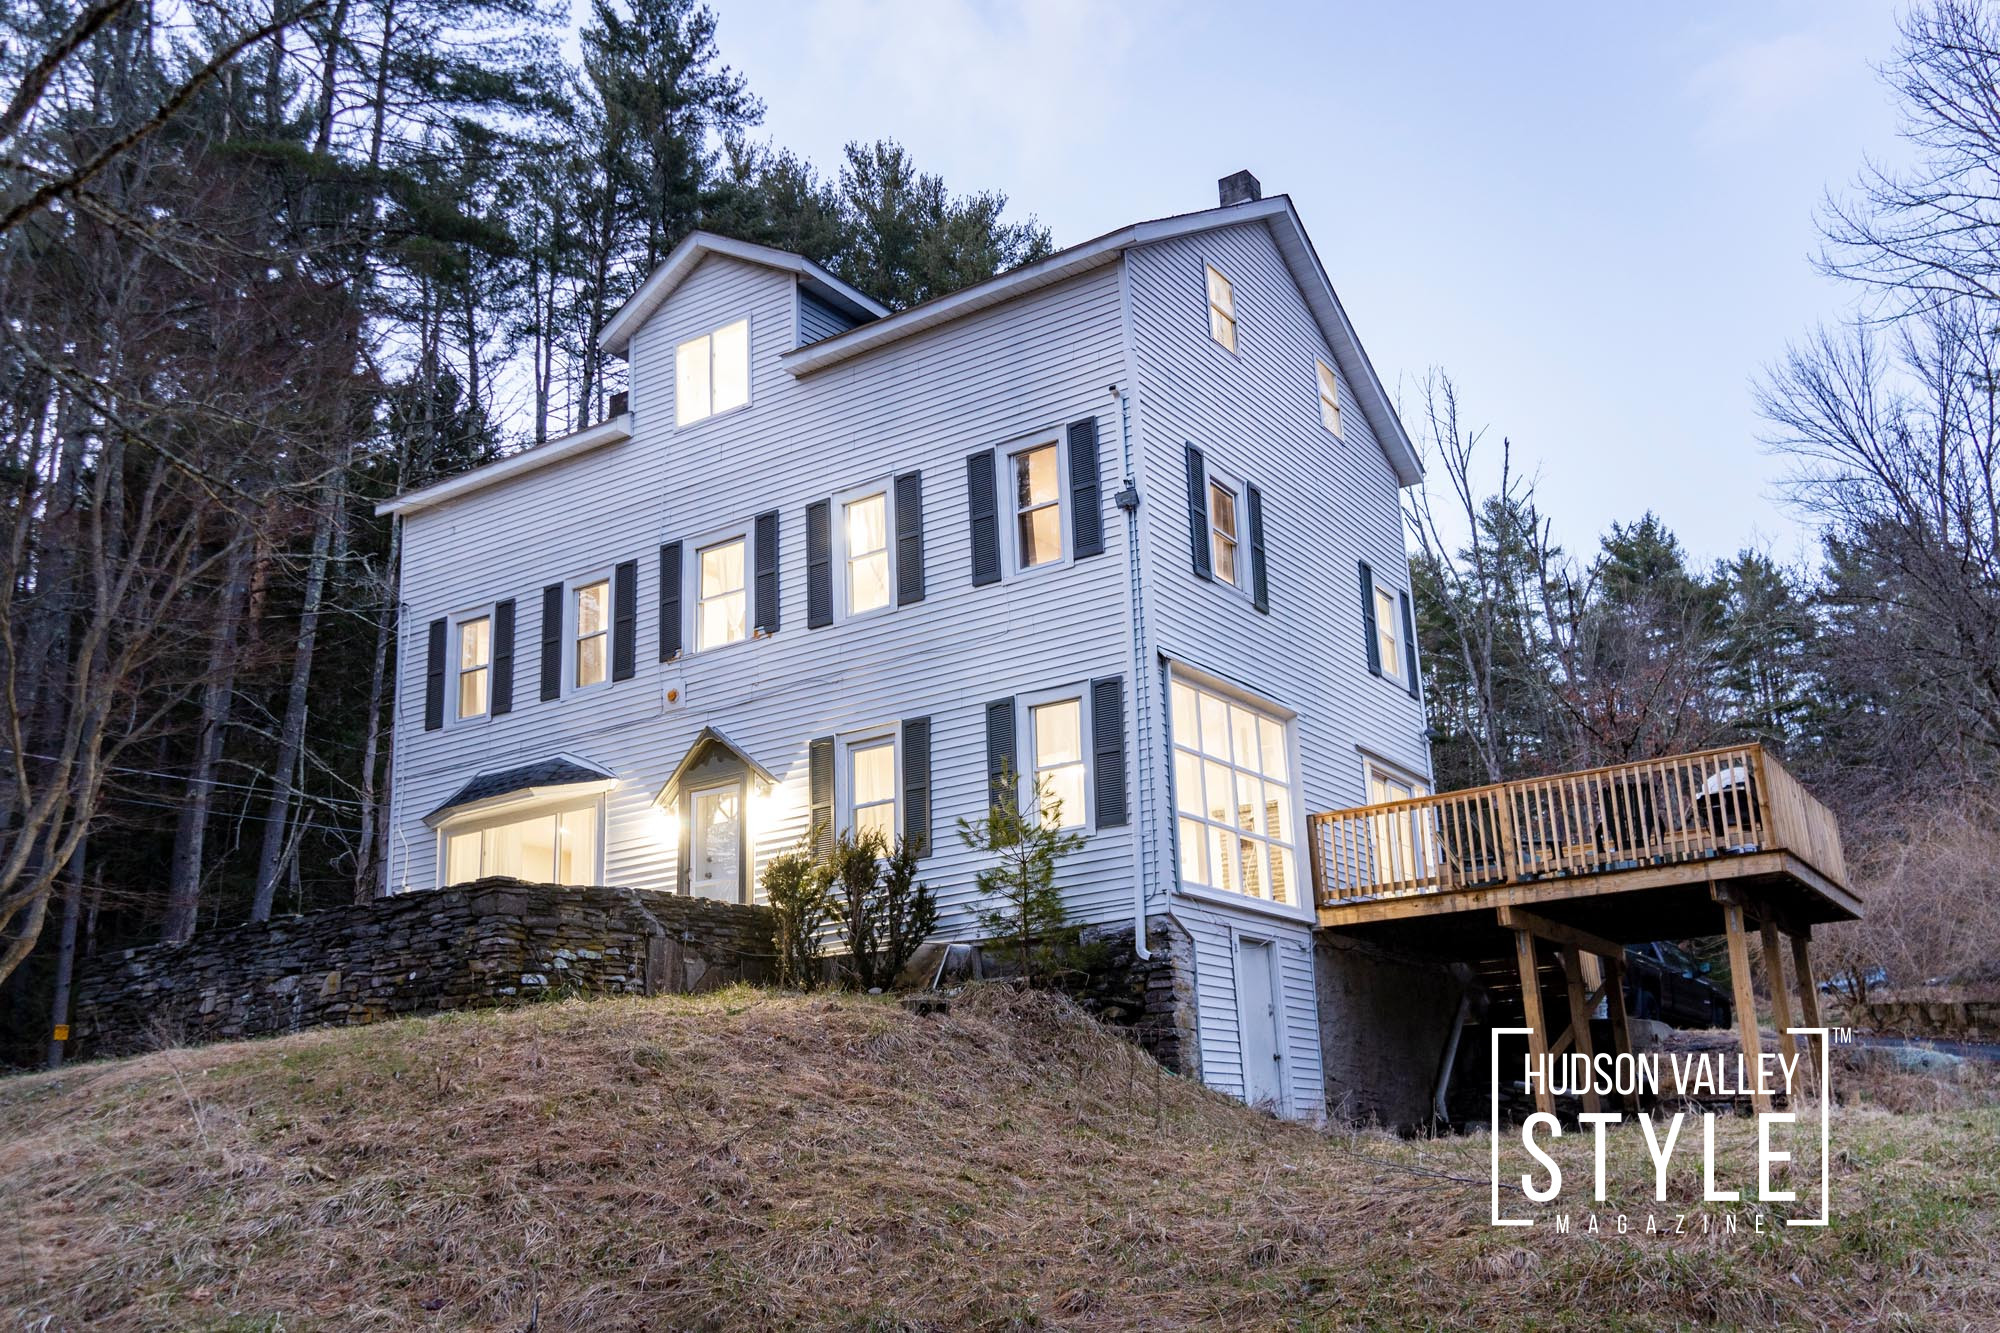 The King of the Hill – Farmhouse for Sale in the Catskill Mountains – Hudson Valley Home for Sale – Photography by ALLUVION MEDIA – Upstate, NY Homes for Sale